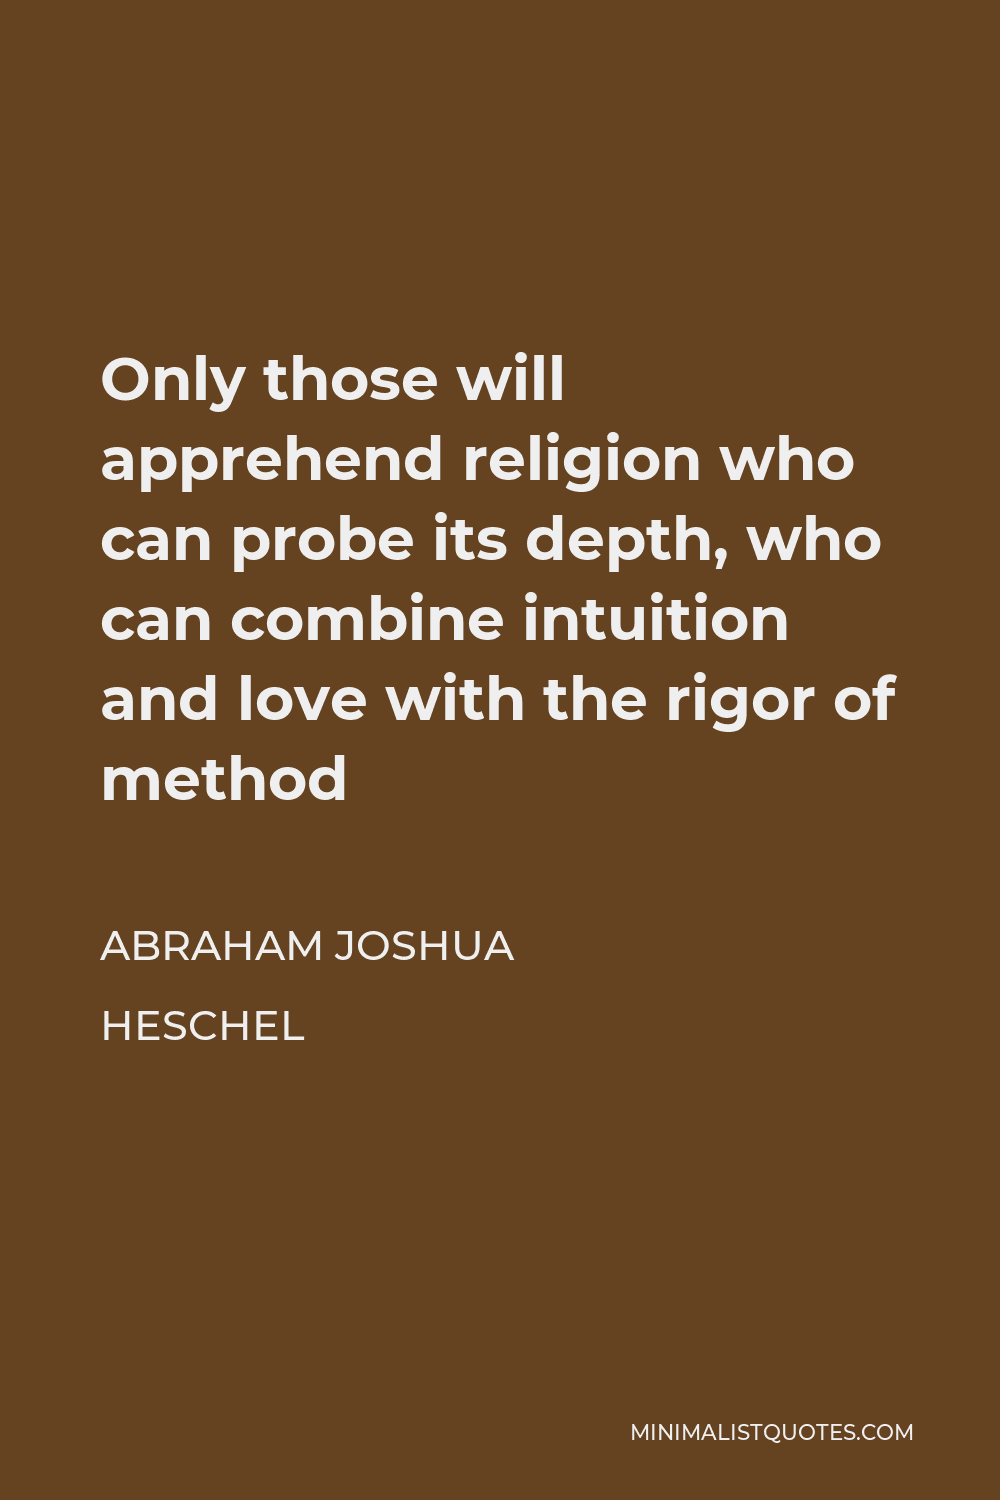 Abraham Joshua Heschel Quote - Only those will apprehend religion who can probe its depth, who can combine intuition and love with the rigor of method